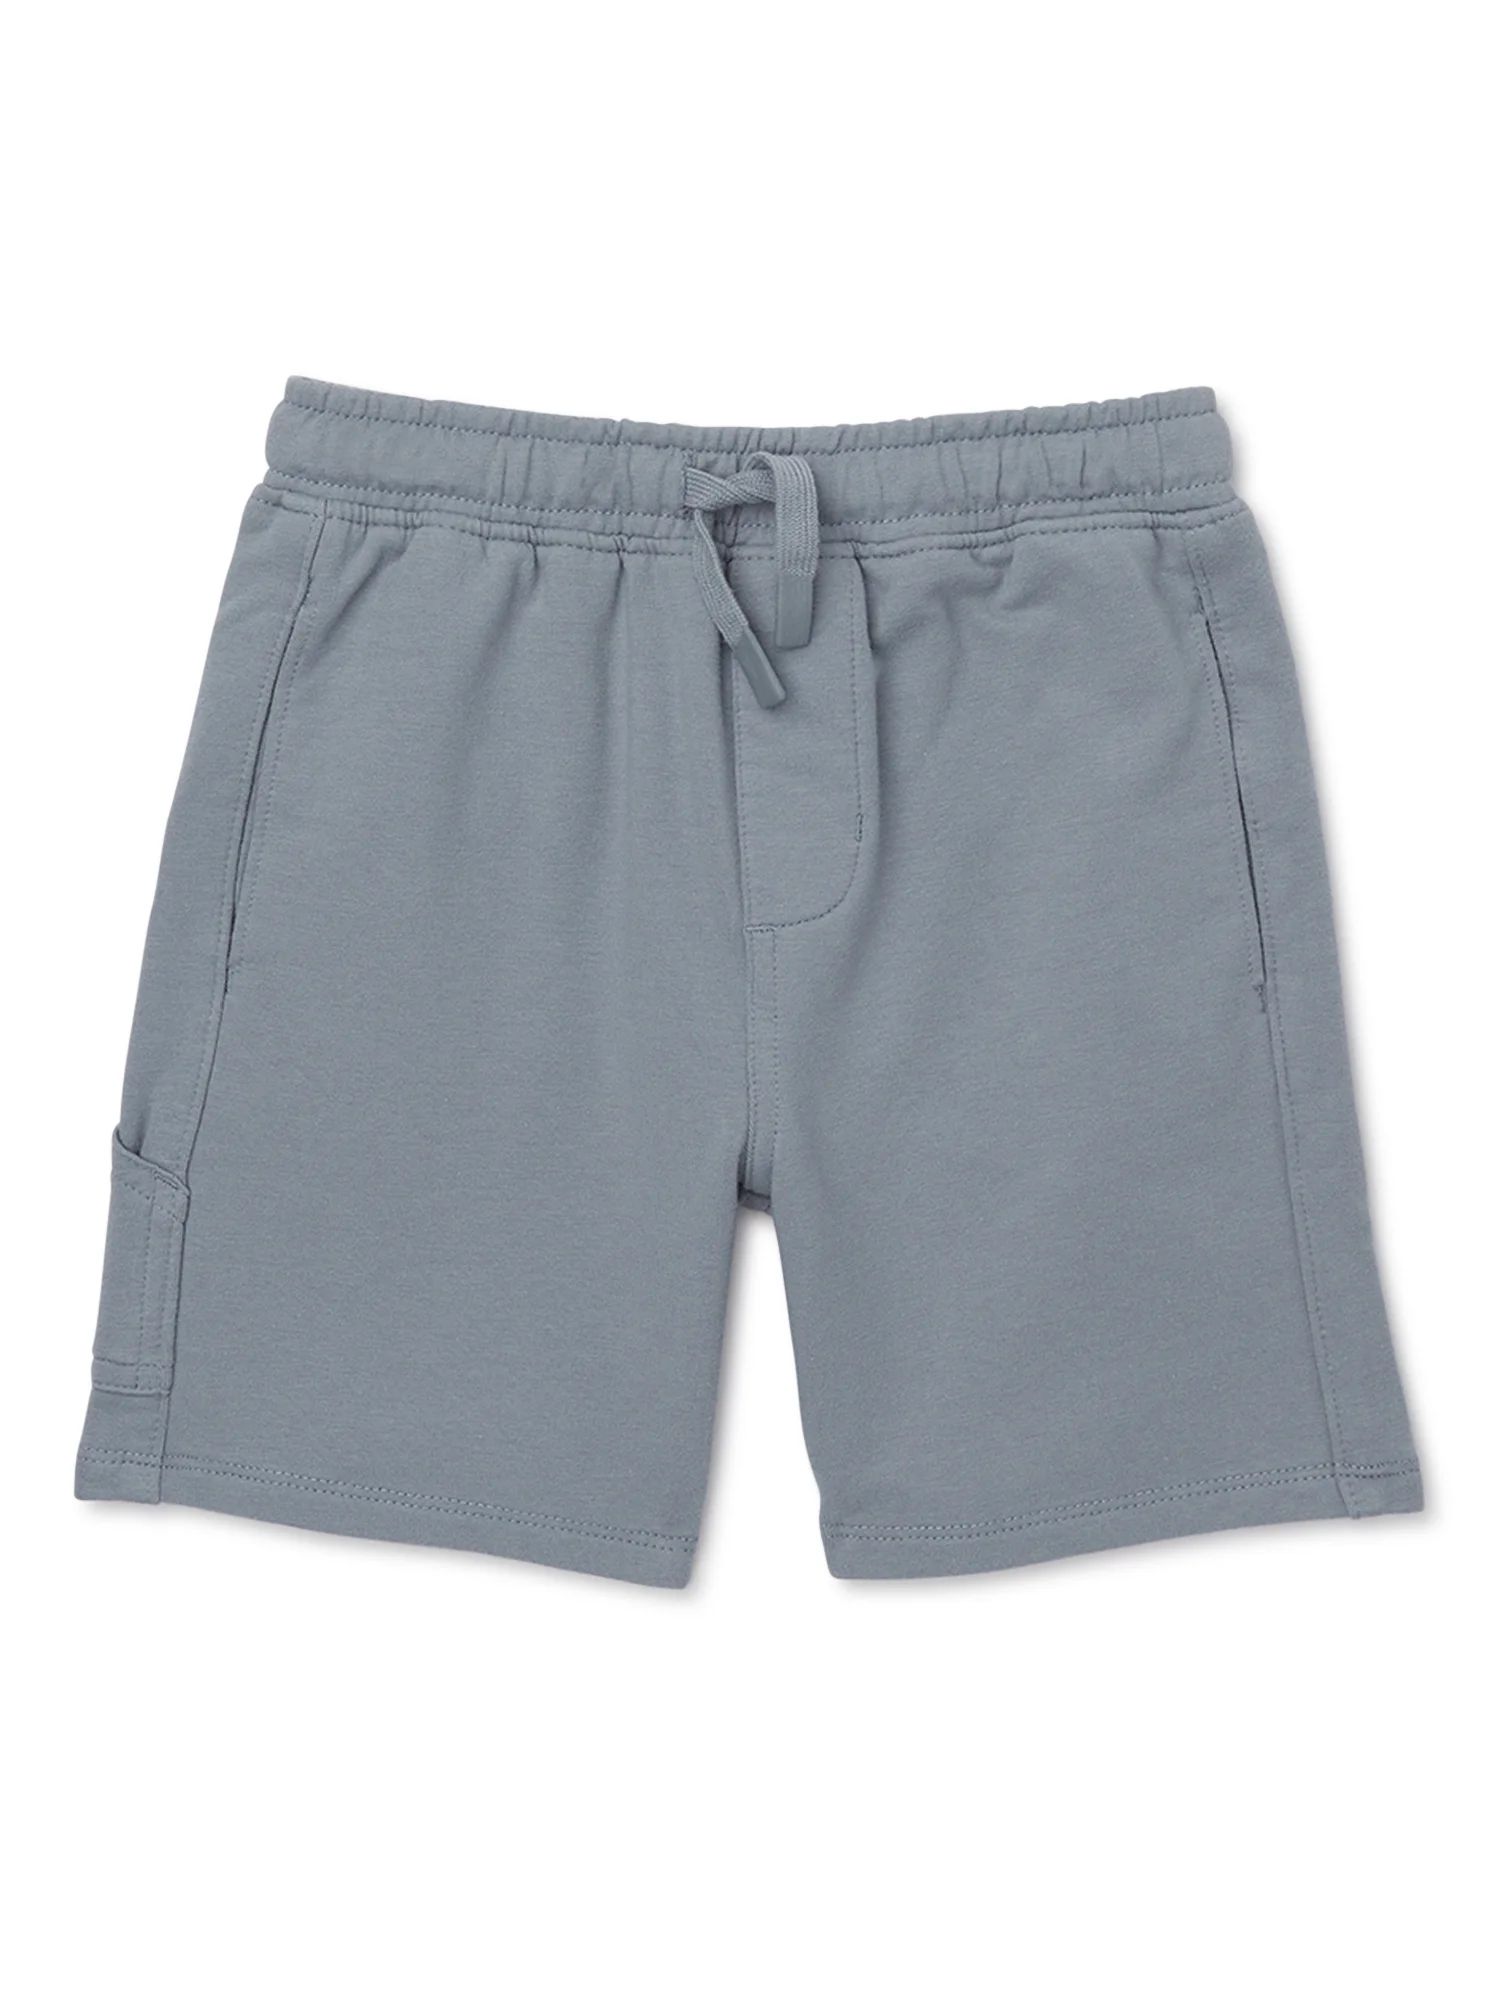 easy-peasy Toddler Boy French Terry Carpenter Shorts, Sizes 18M-5T | Walmart (US)